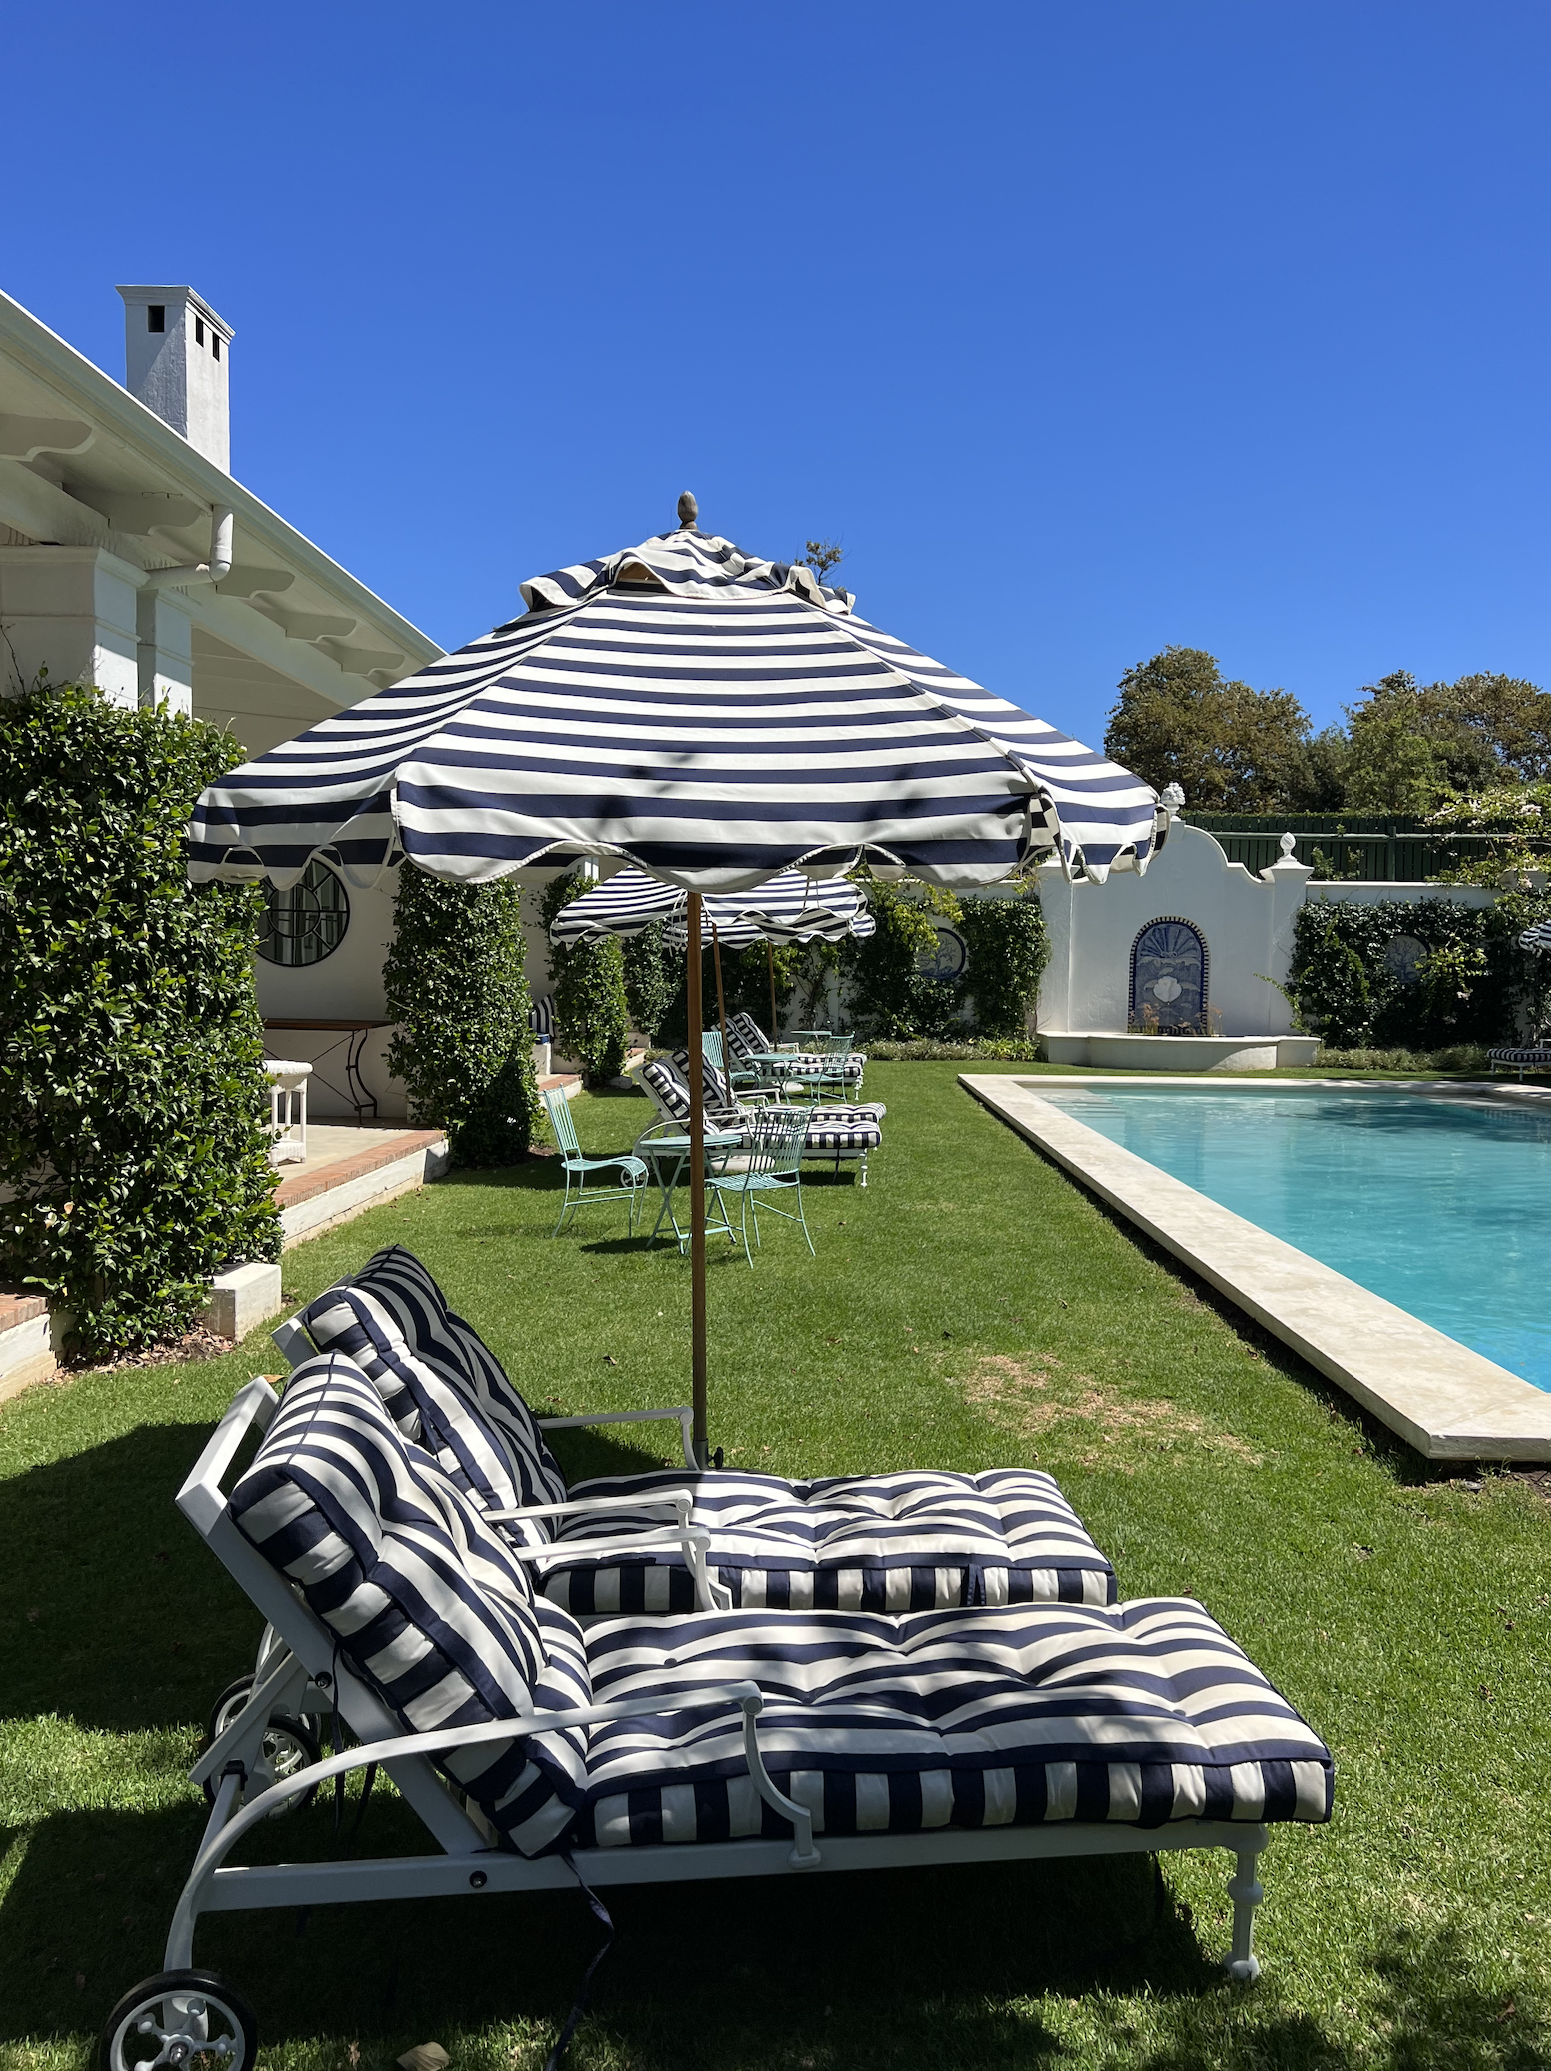 La Cotte is my favorite choice for mid-ranged prices boutique hotels in Franschhoek